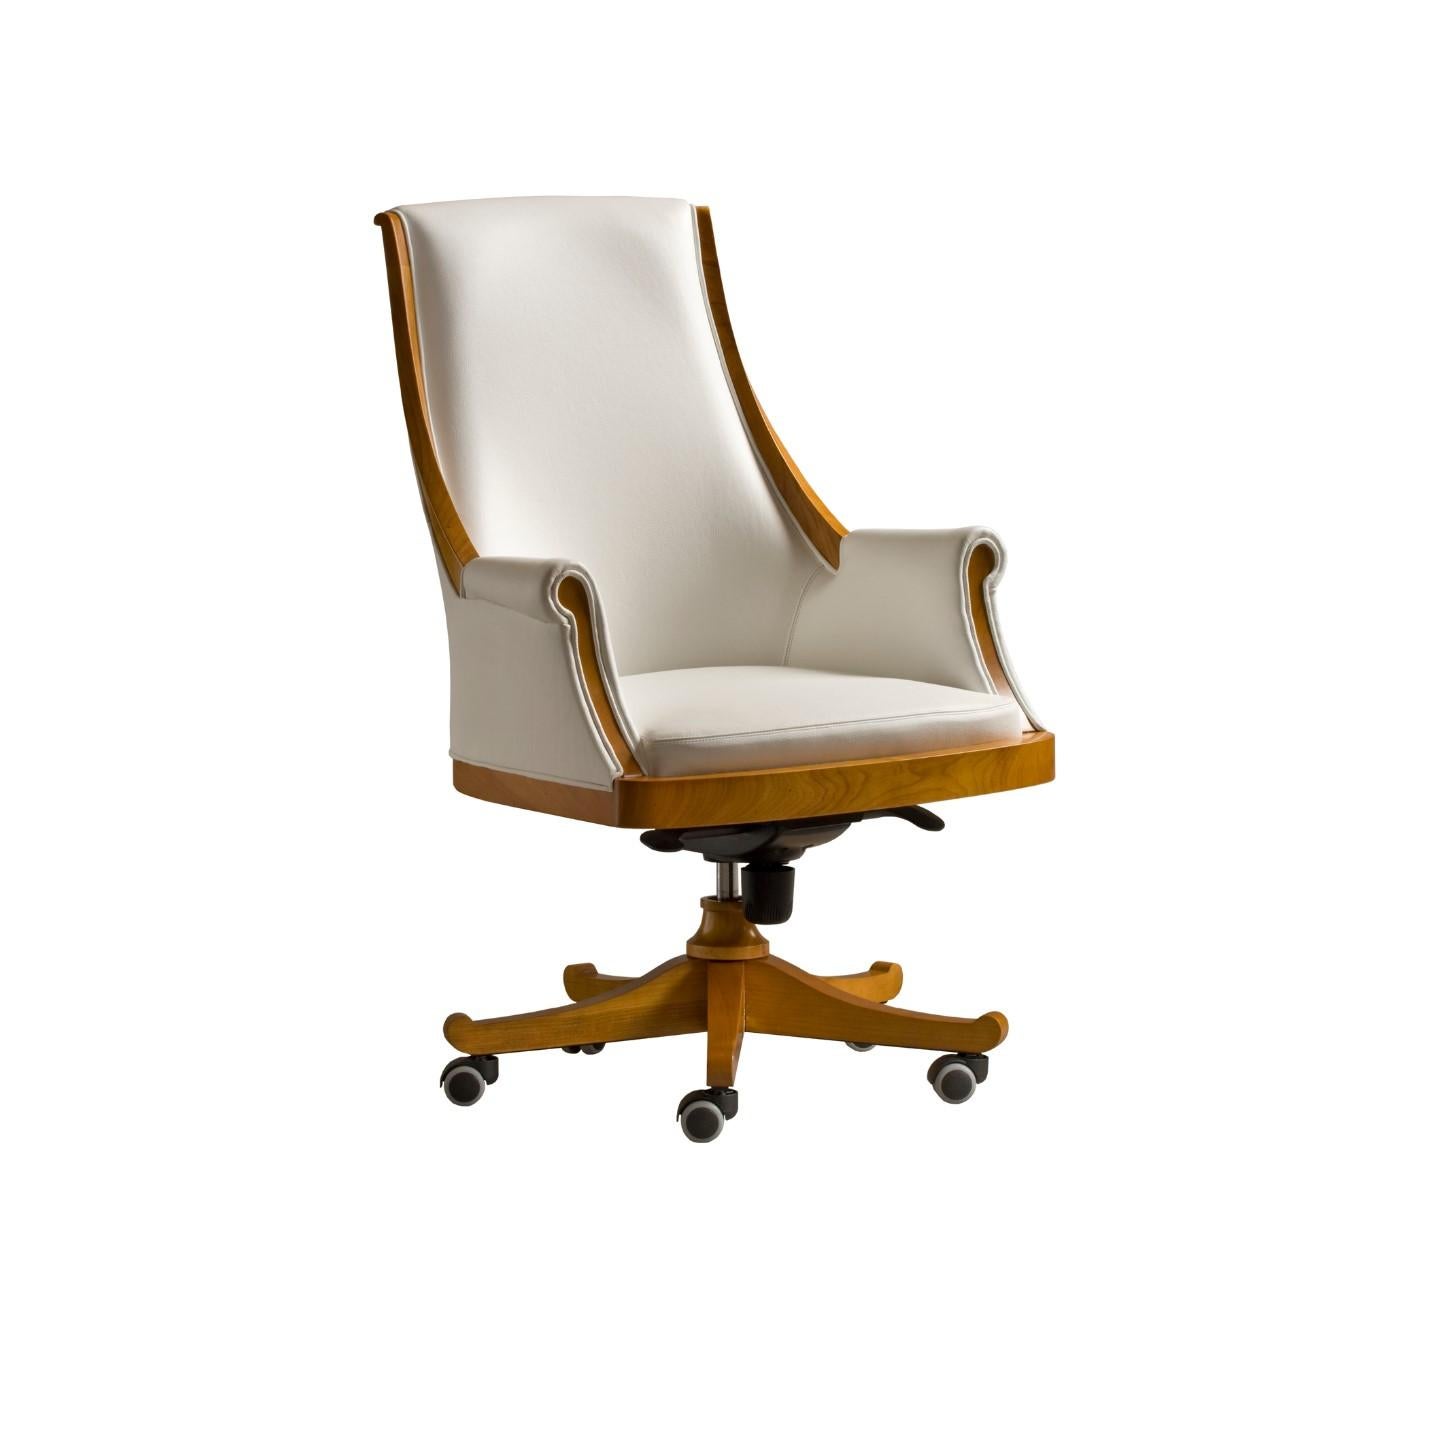 President is a new line dedicated to the workplace, inspired by the Biedermeier style but with a modern twist. Pieces of furniture with important lines and of unique design.
Armchair on wheels
Made of solid cherrywood and available in different